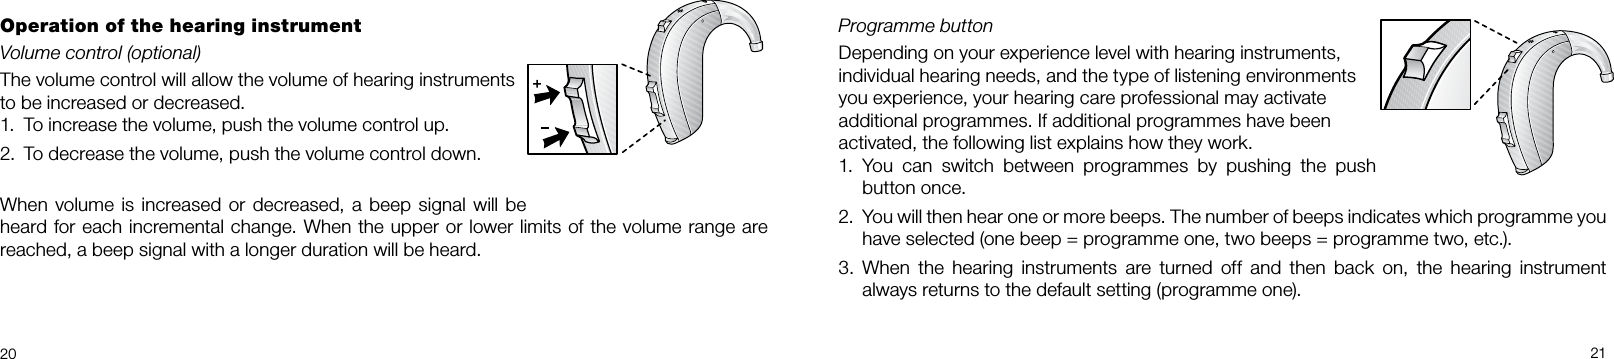 2021Programme button Depending on your experience level with hearing instruments, individual hearing needs, and the type of listening environments you experience, your hearing care professional may activate additional programmes. If additional programmes have been activated, the following list explains how they work.You  can  switch  between  programmes  by  pushing  the  push 1. button once.You will then hear one or more beeps. The number of beeps indicates which programme you 2. have selected (one beep = programme one, two beeps = programme two, etc.). When  the  hearing  instruments  are  turned  off  and  then  back  on,  the  hearing  instrument 3. always returns to the default setting (programme one).Operation of the hearing instrumentVolume control (optional)The volume control will allow the volume of hearing instruments to be increased or decreased.To increase the volume, push the volume control up.1. To decrease the volume, push the volume control down.2. When volume is increased or decreased, a beep signal will be heard for each incremental change. When the upper or lower limits of the volume range are reached, a beep signal with a longer duration will be heard.